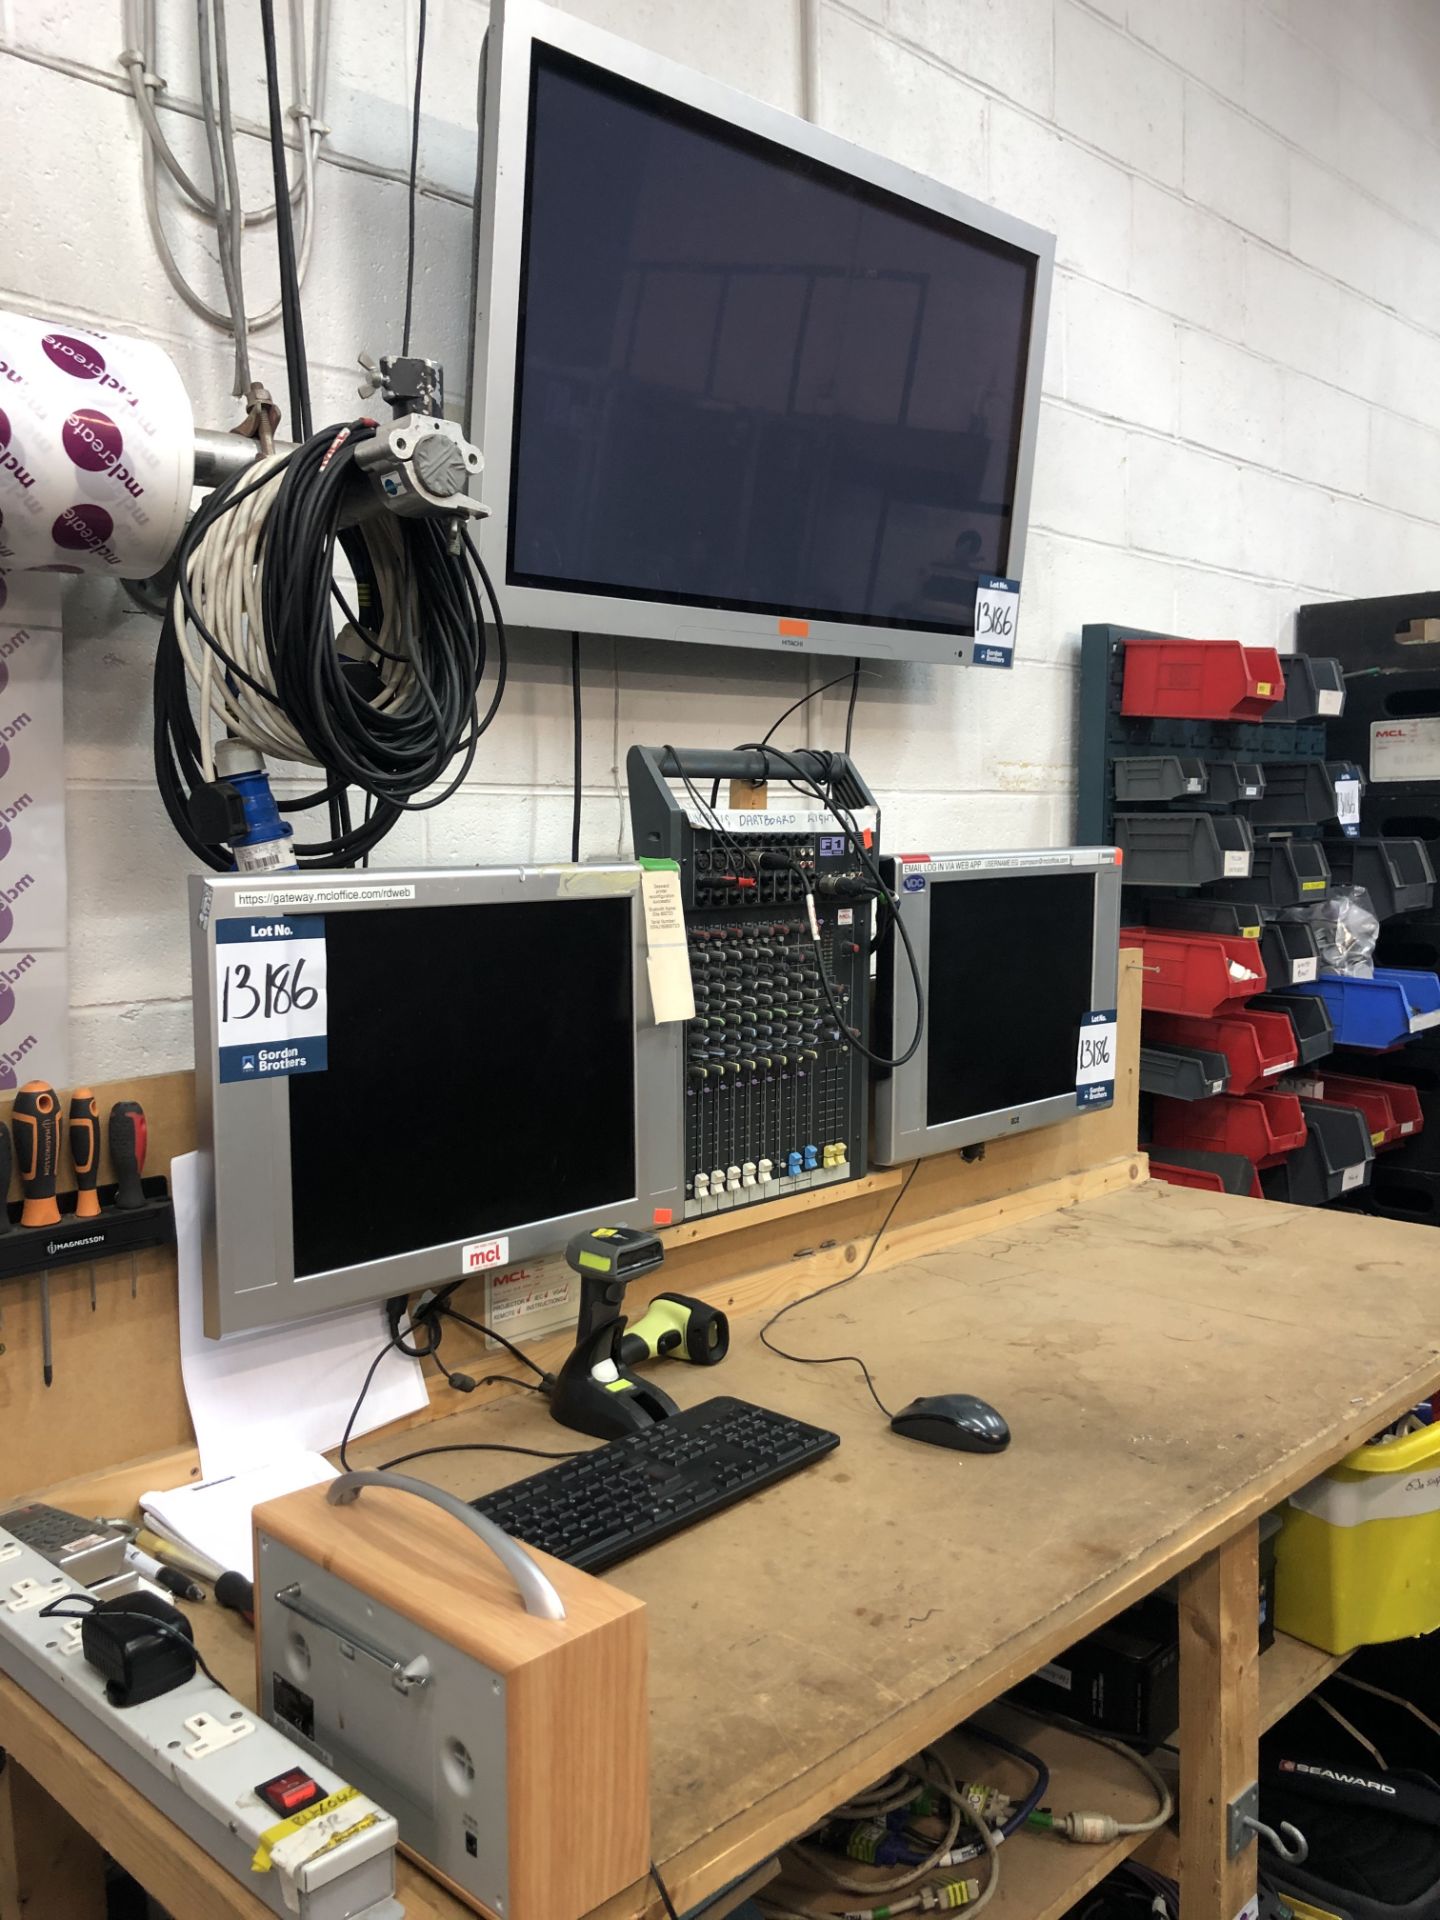 Audio/visual test bench with Dell, Powerconnect 26